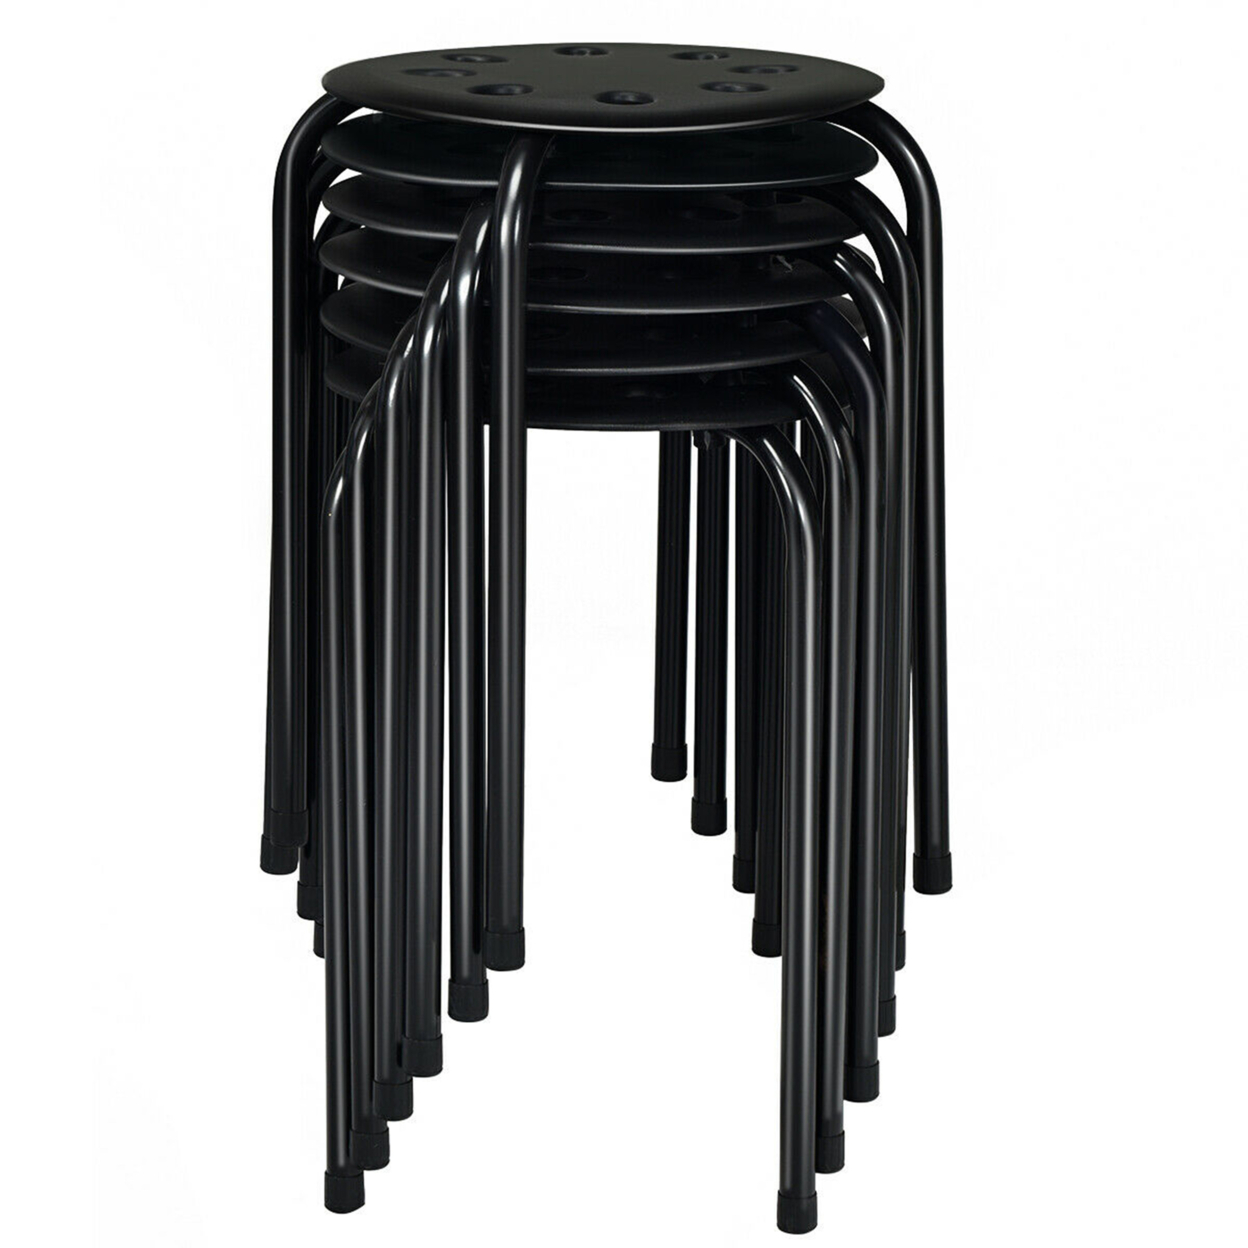 Set Of 6 Portable Plastic Stack Stools Backless Classroom Seating - Black